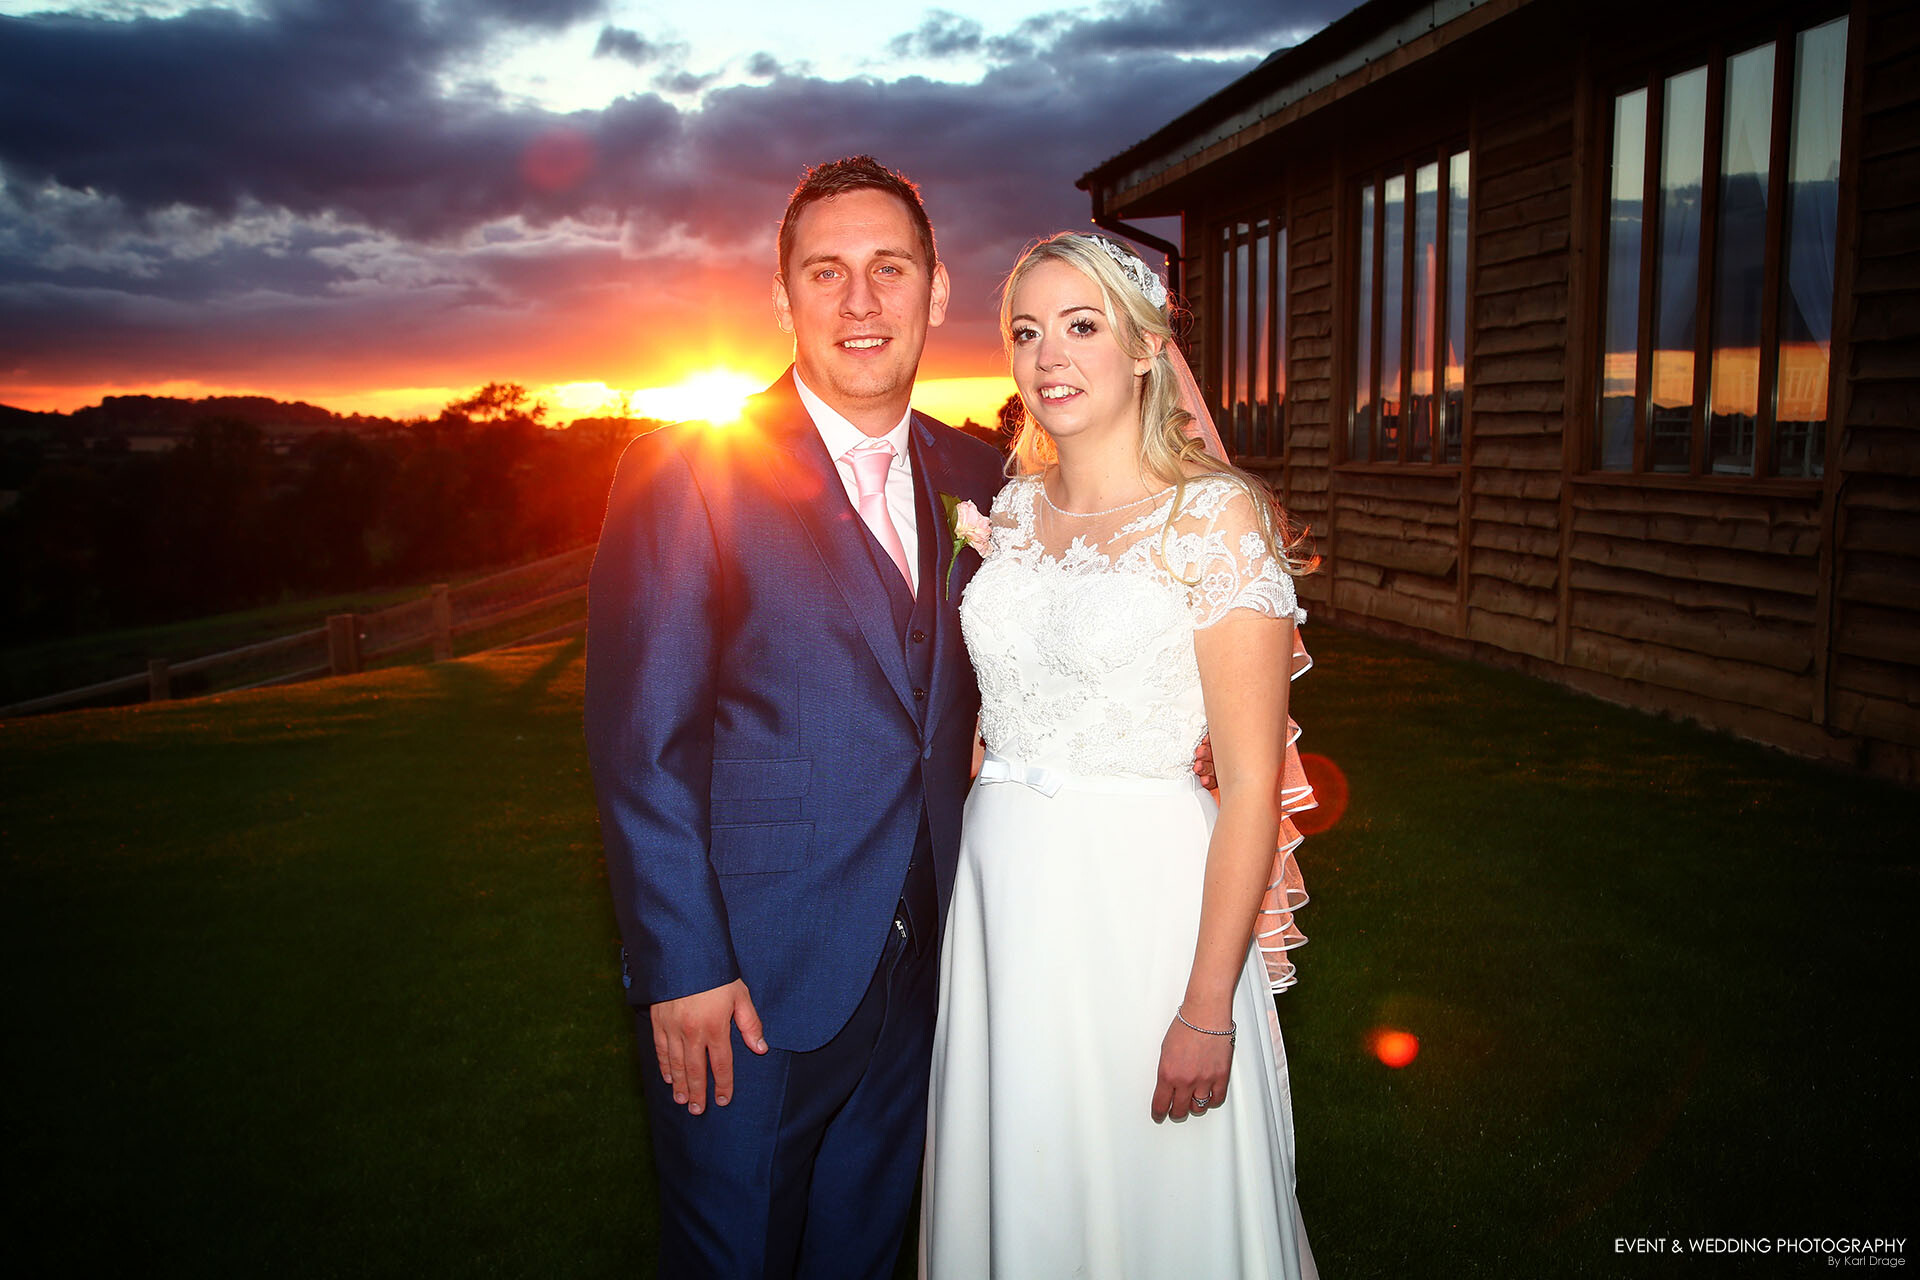 An amazing Skylark Farm wedding day sunset for this bride and groom